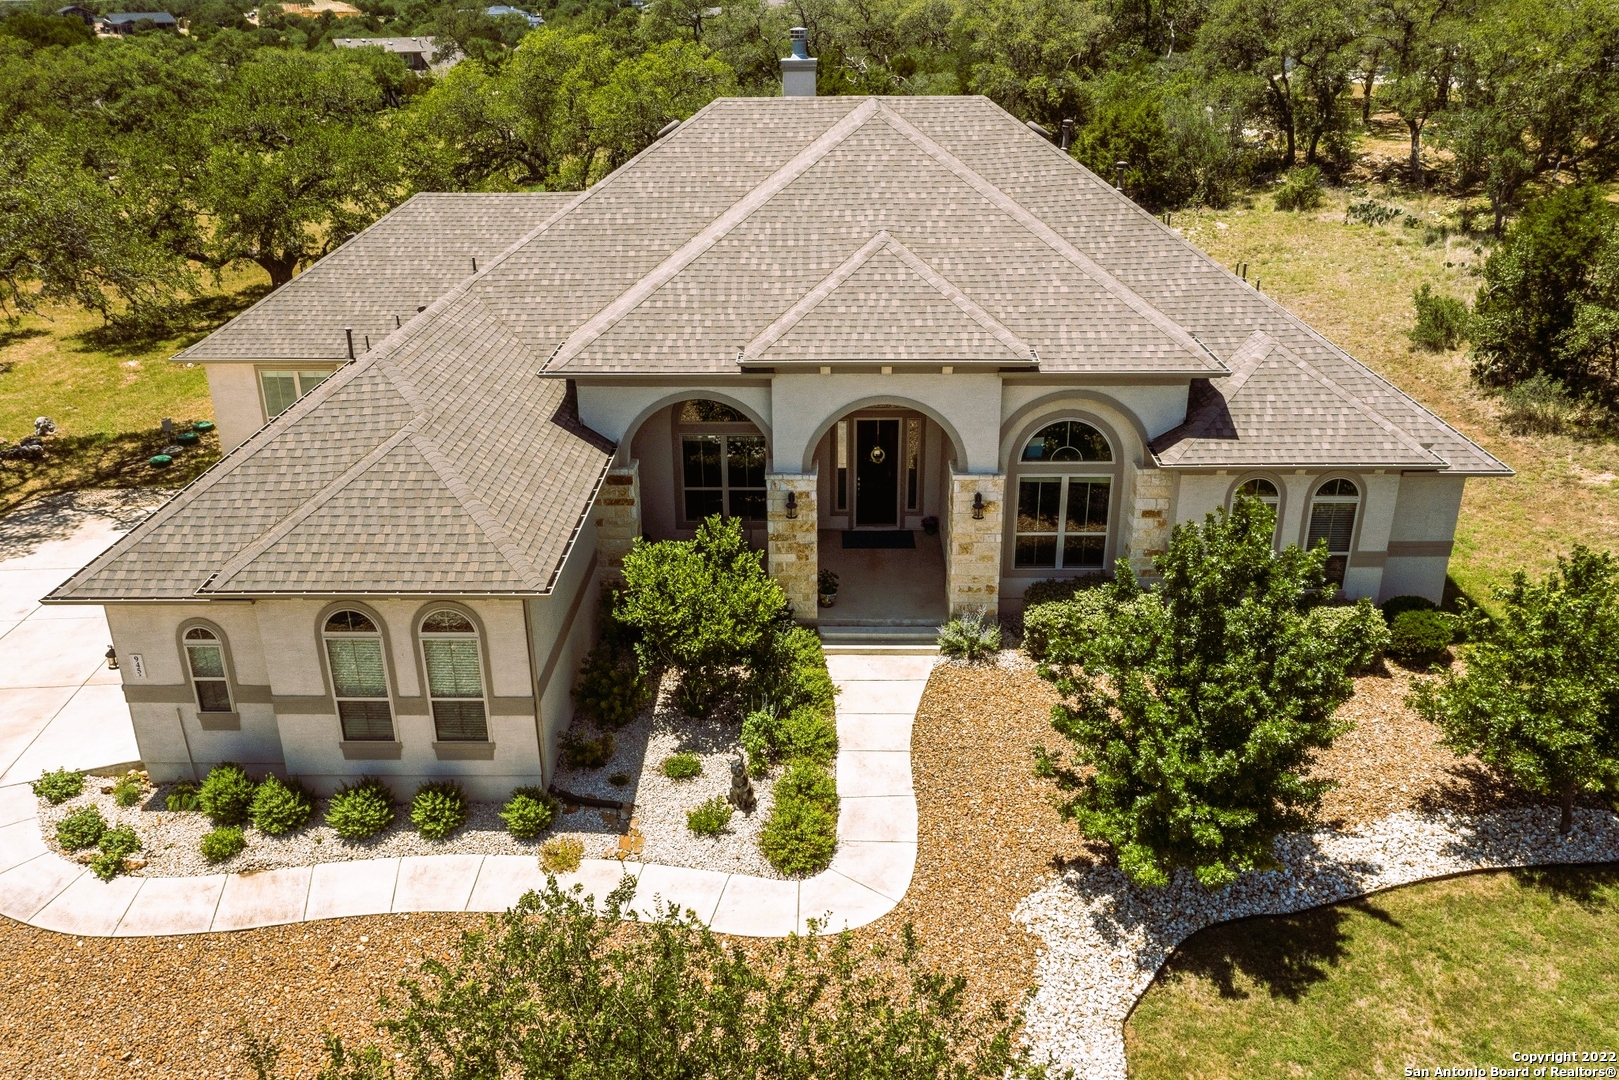 MUST SEE. Easy Hill Country Living found here in this gorgeous and spacious 5 Bedroom/4.5Bath/3 Car Garage/3,801 sf custom home on over 1 acre, set among the mature oaks with amazing sunset views from your back patio that will rival Tara in Gone with the Wind! Come discover the essence of Texas Hill country lifestyle and all this home has to offer from moment you enter with soaring ceilings, wall to wall windows in the 2 living areas, both with fireplaces that over look the Oaks, and the chefs delight kitchen with butler & wet Bar and formal & casual dining areas, featuring gas range, double ovens, 2 islands perfect for family gatherings and entertaining indoors and out. Spacious luxe owners suite wing with bay sitting area and 3 closets. 2nd bedroom has its own loft. 3rd & 4th bdrm suites w/private bath.  And in one of the most sought after communities in the TX Hill Country offering miles of hiking/biking/jogging /walking nature trails, Clubhouse with olympic size pool and a lazy river to float, community events, 8,000 sf state-of-the-art fitness center, sports courts, concerts, and so much more. Located between San Antonio and Austin in New Braunfels. COMAL ISD. Low property taxes. Come make this your home and start enjoying the Texas lifestyle today!